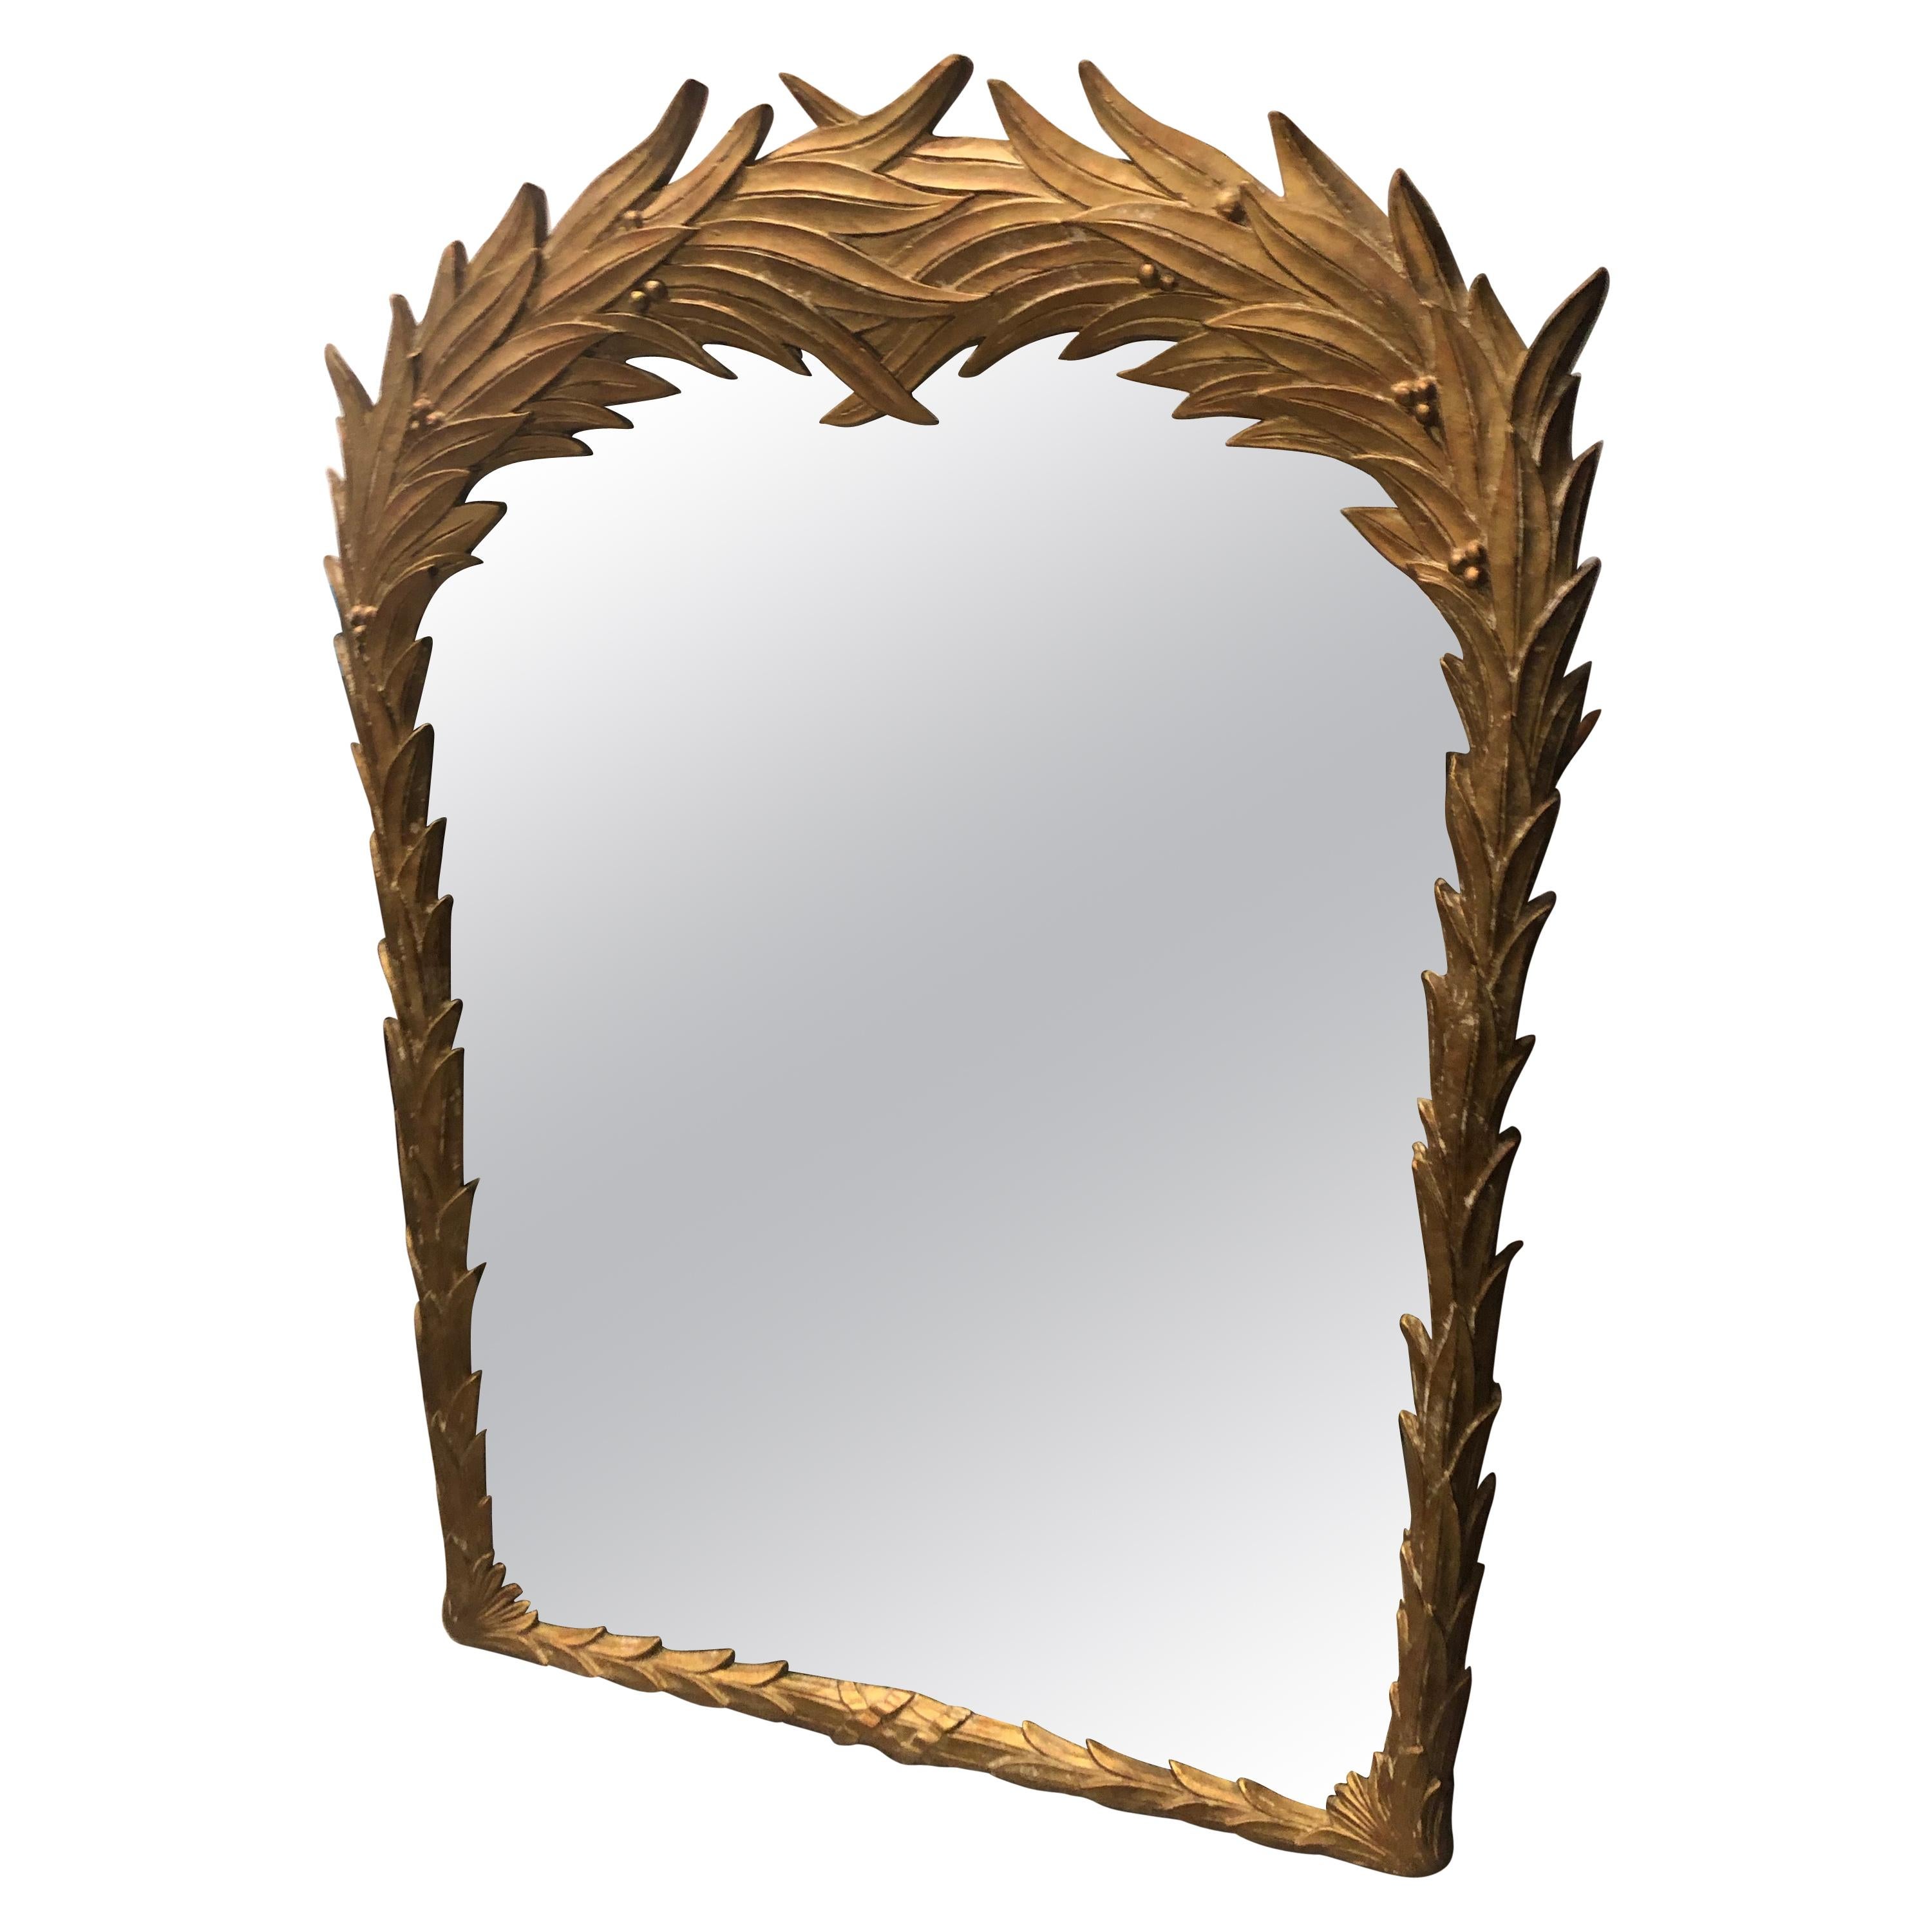 Vintage Palm Frond Wall Mirror Leaf Serge Roche Style Tropical Palm Beach